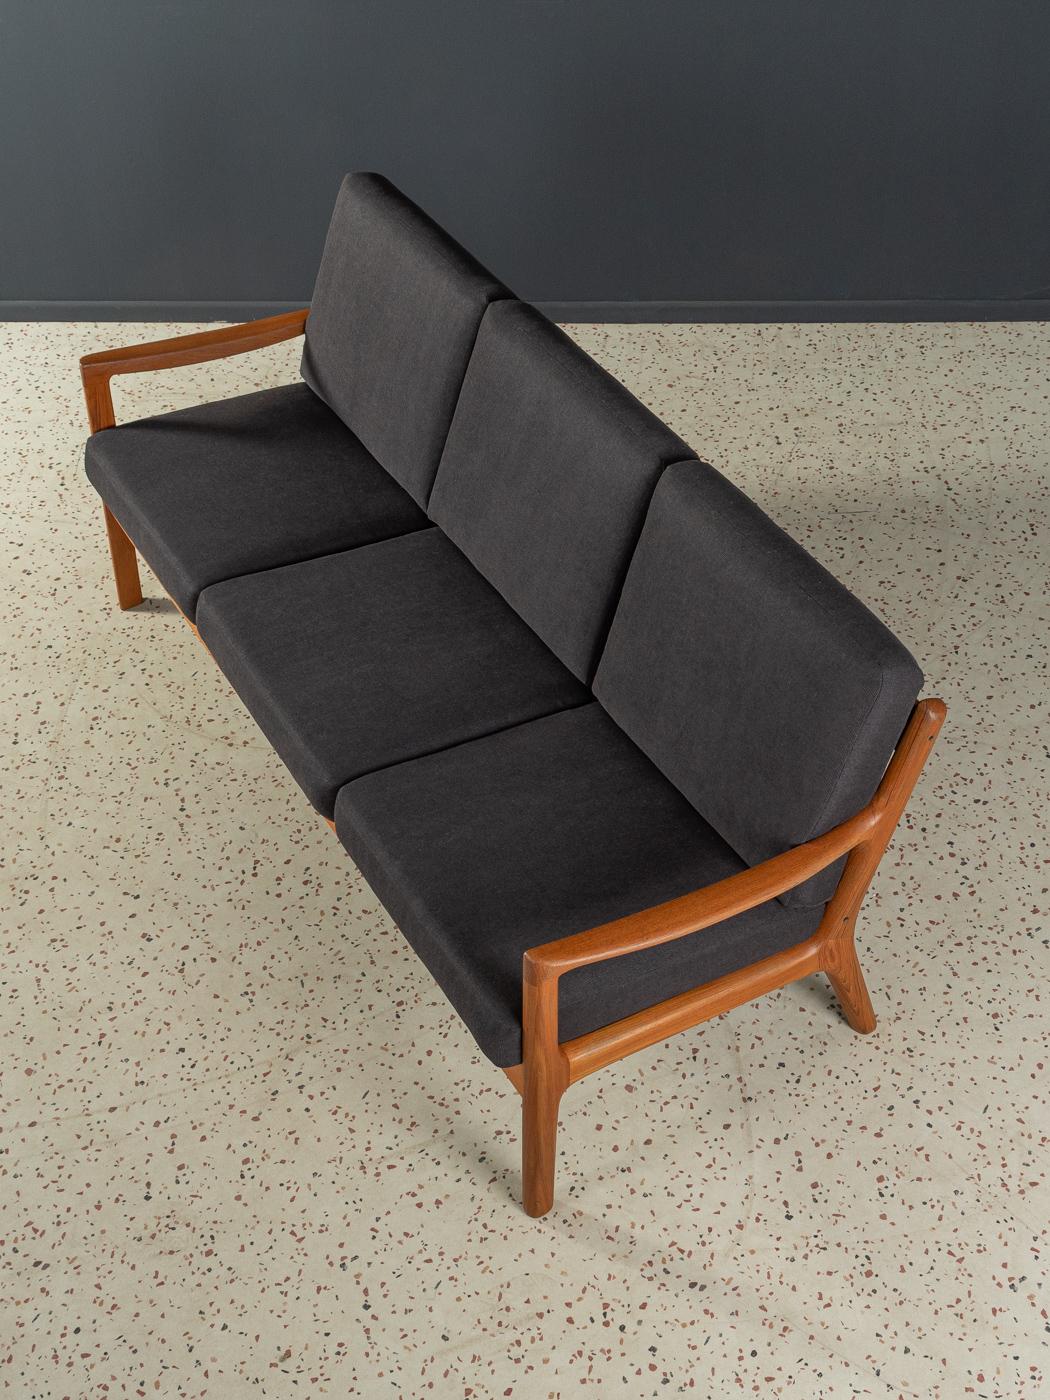 Upholstery 1960s Sofa by Ole Wanscher for Cado Danish Design